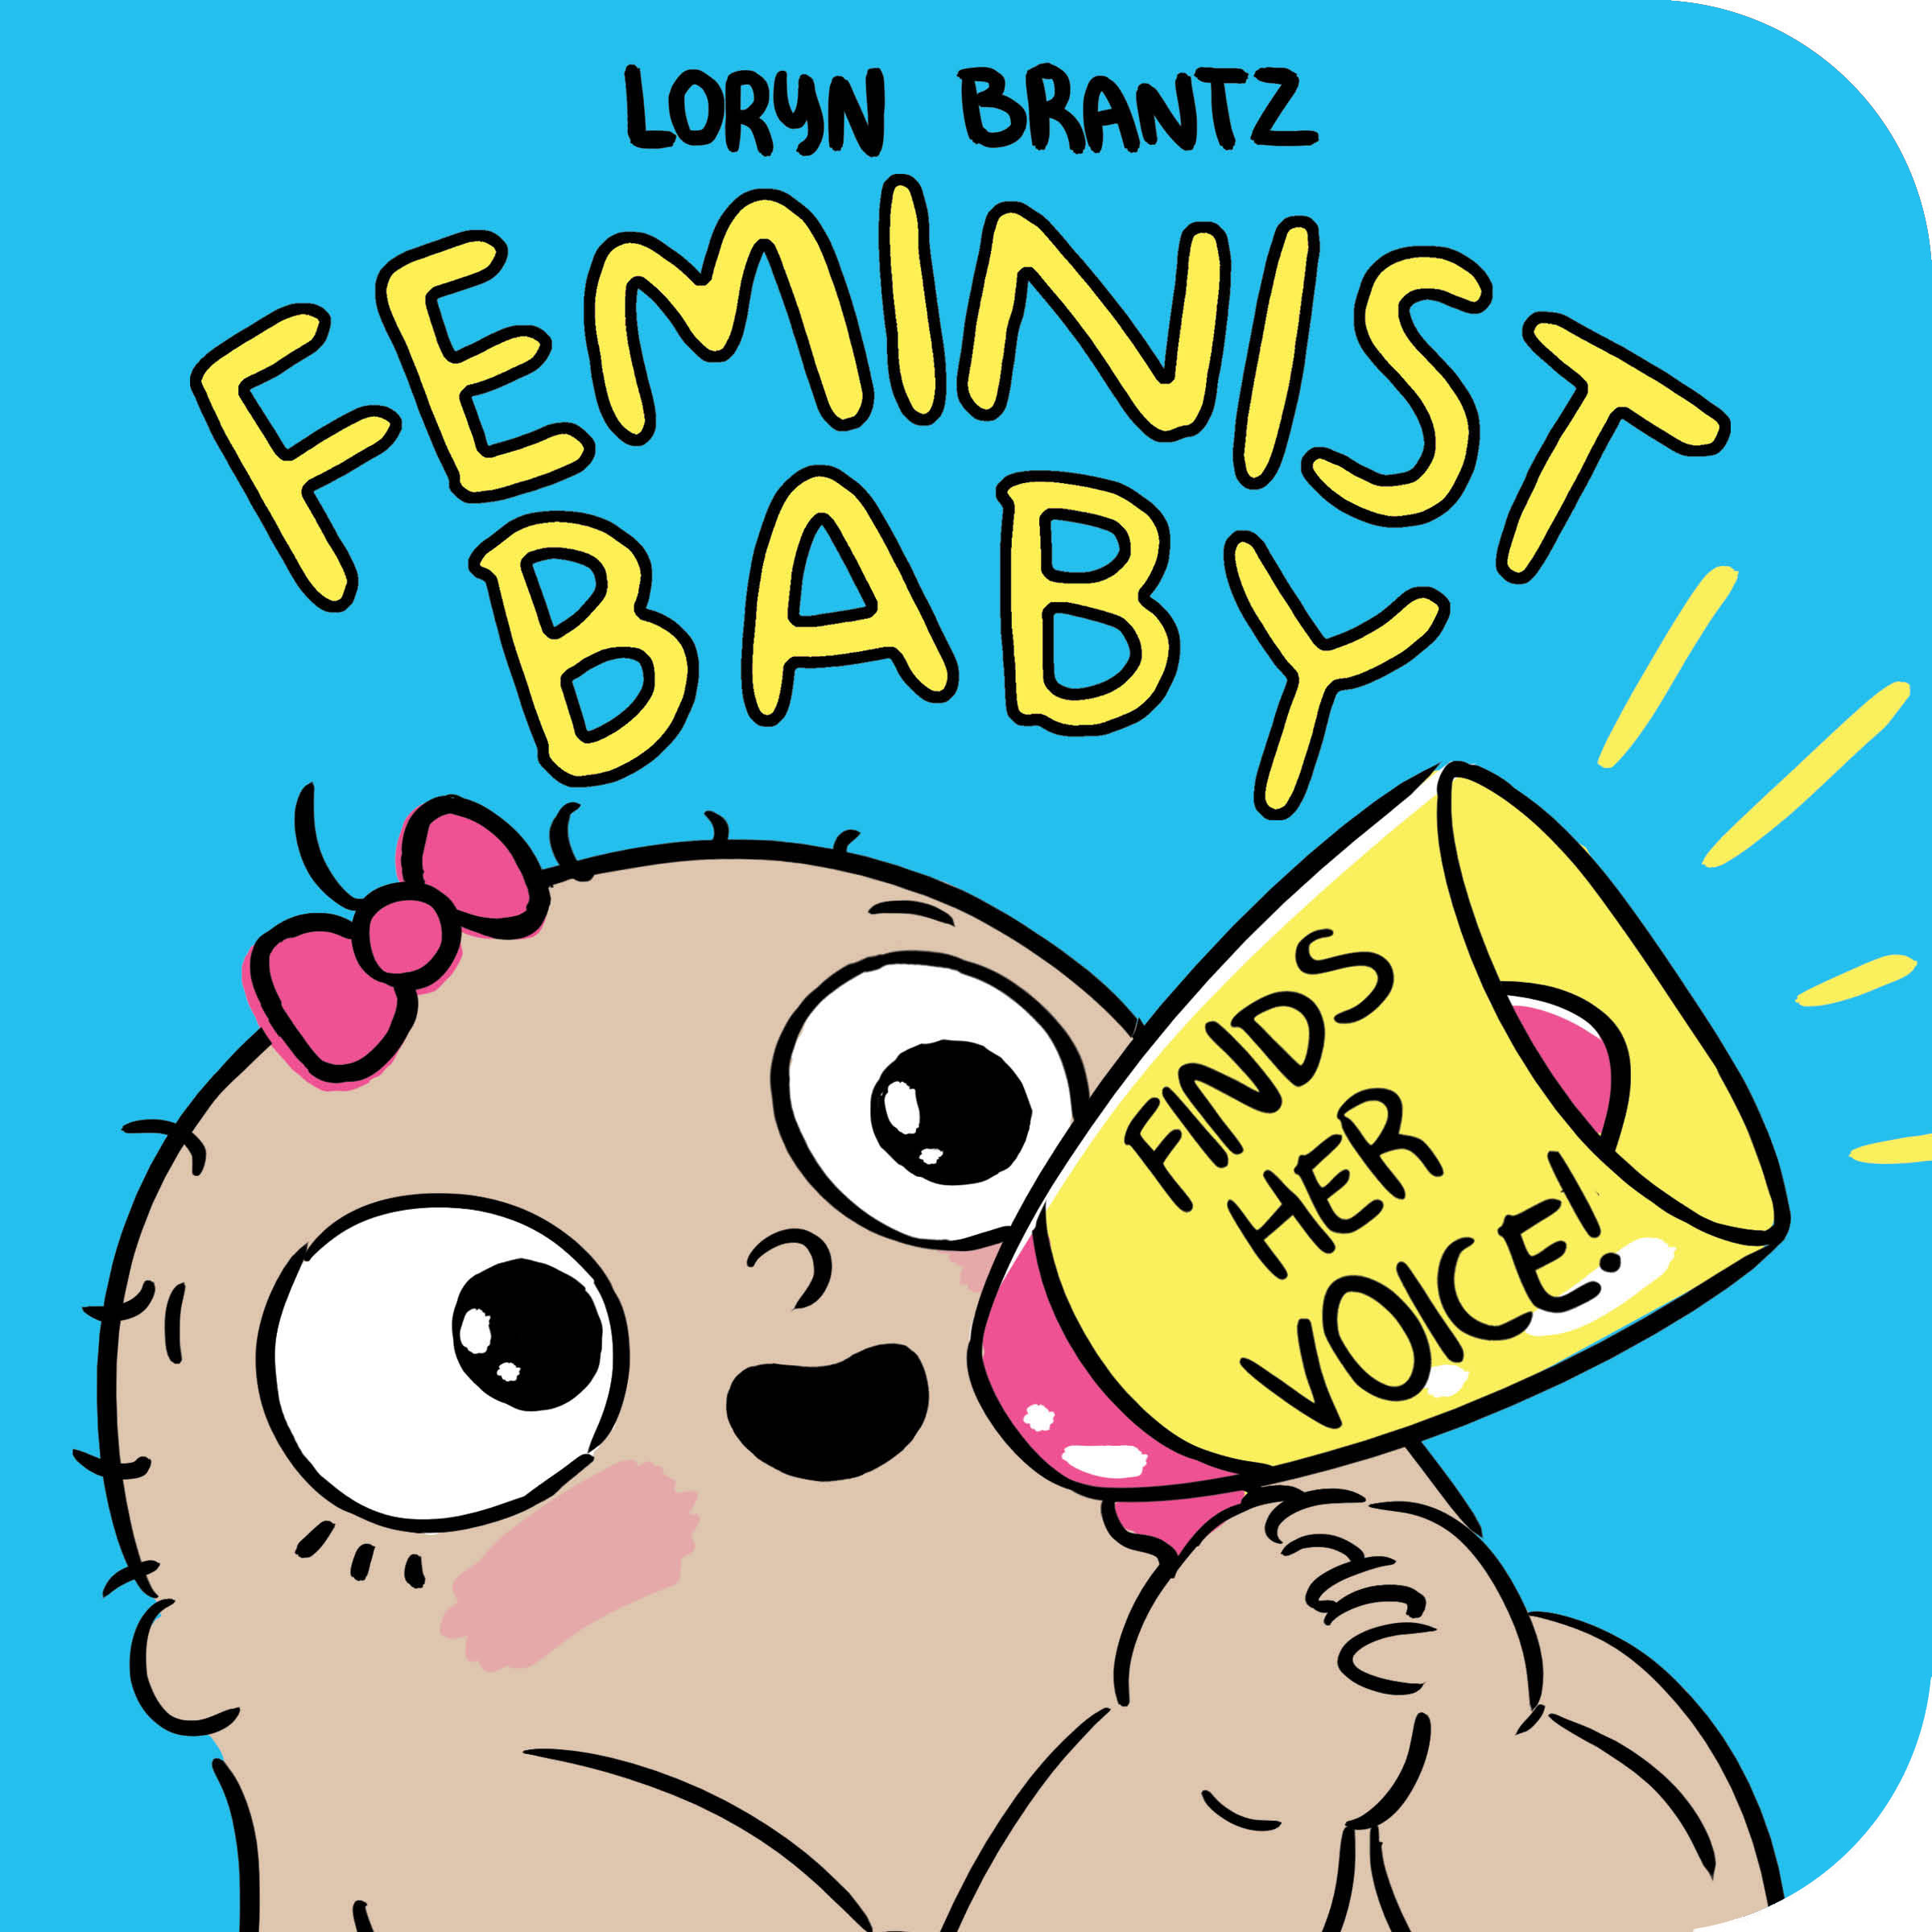 Sunday Story Time with Loryn Brantz (Author & Illustrator of Feminist Baby Finds Her Voice)